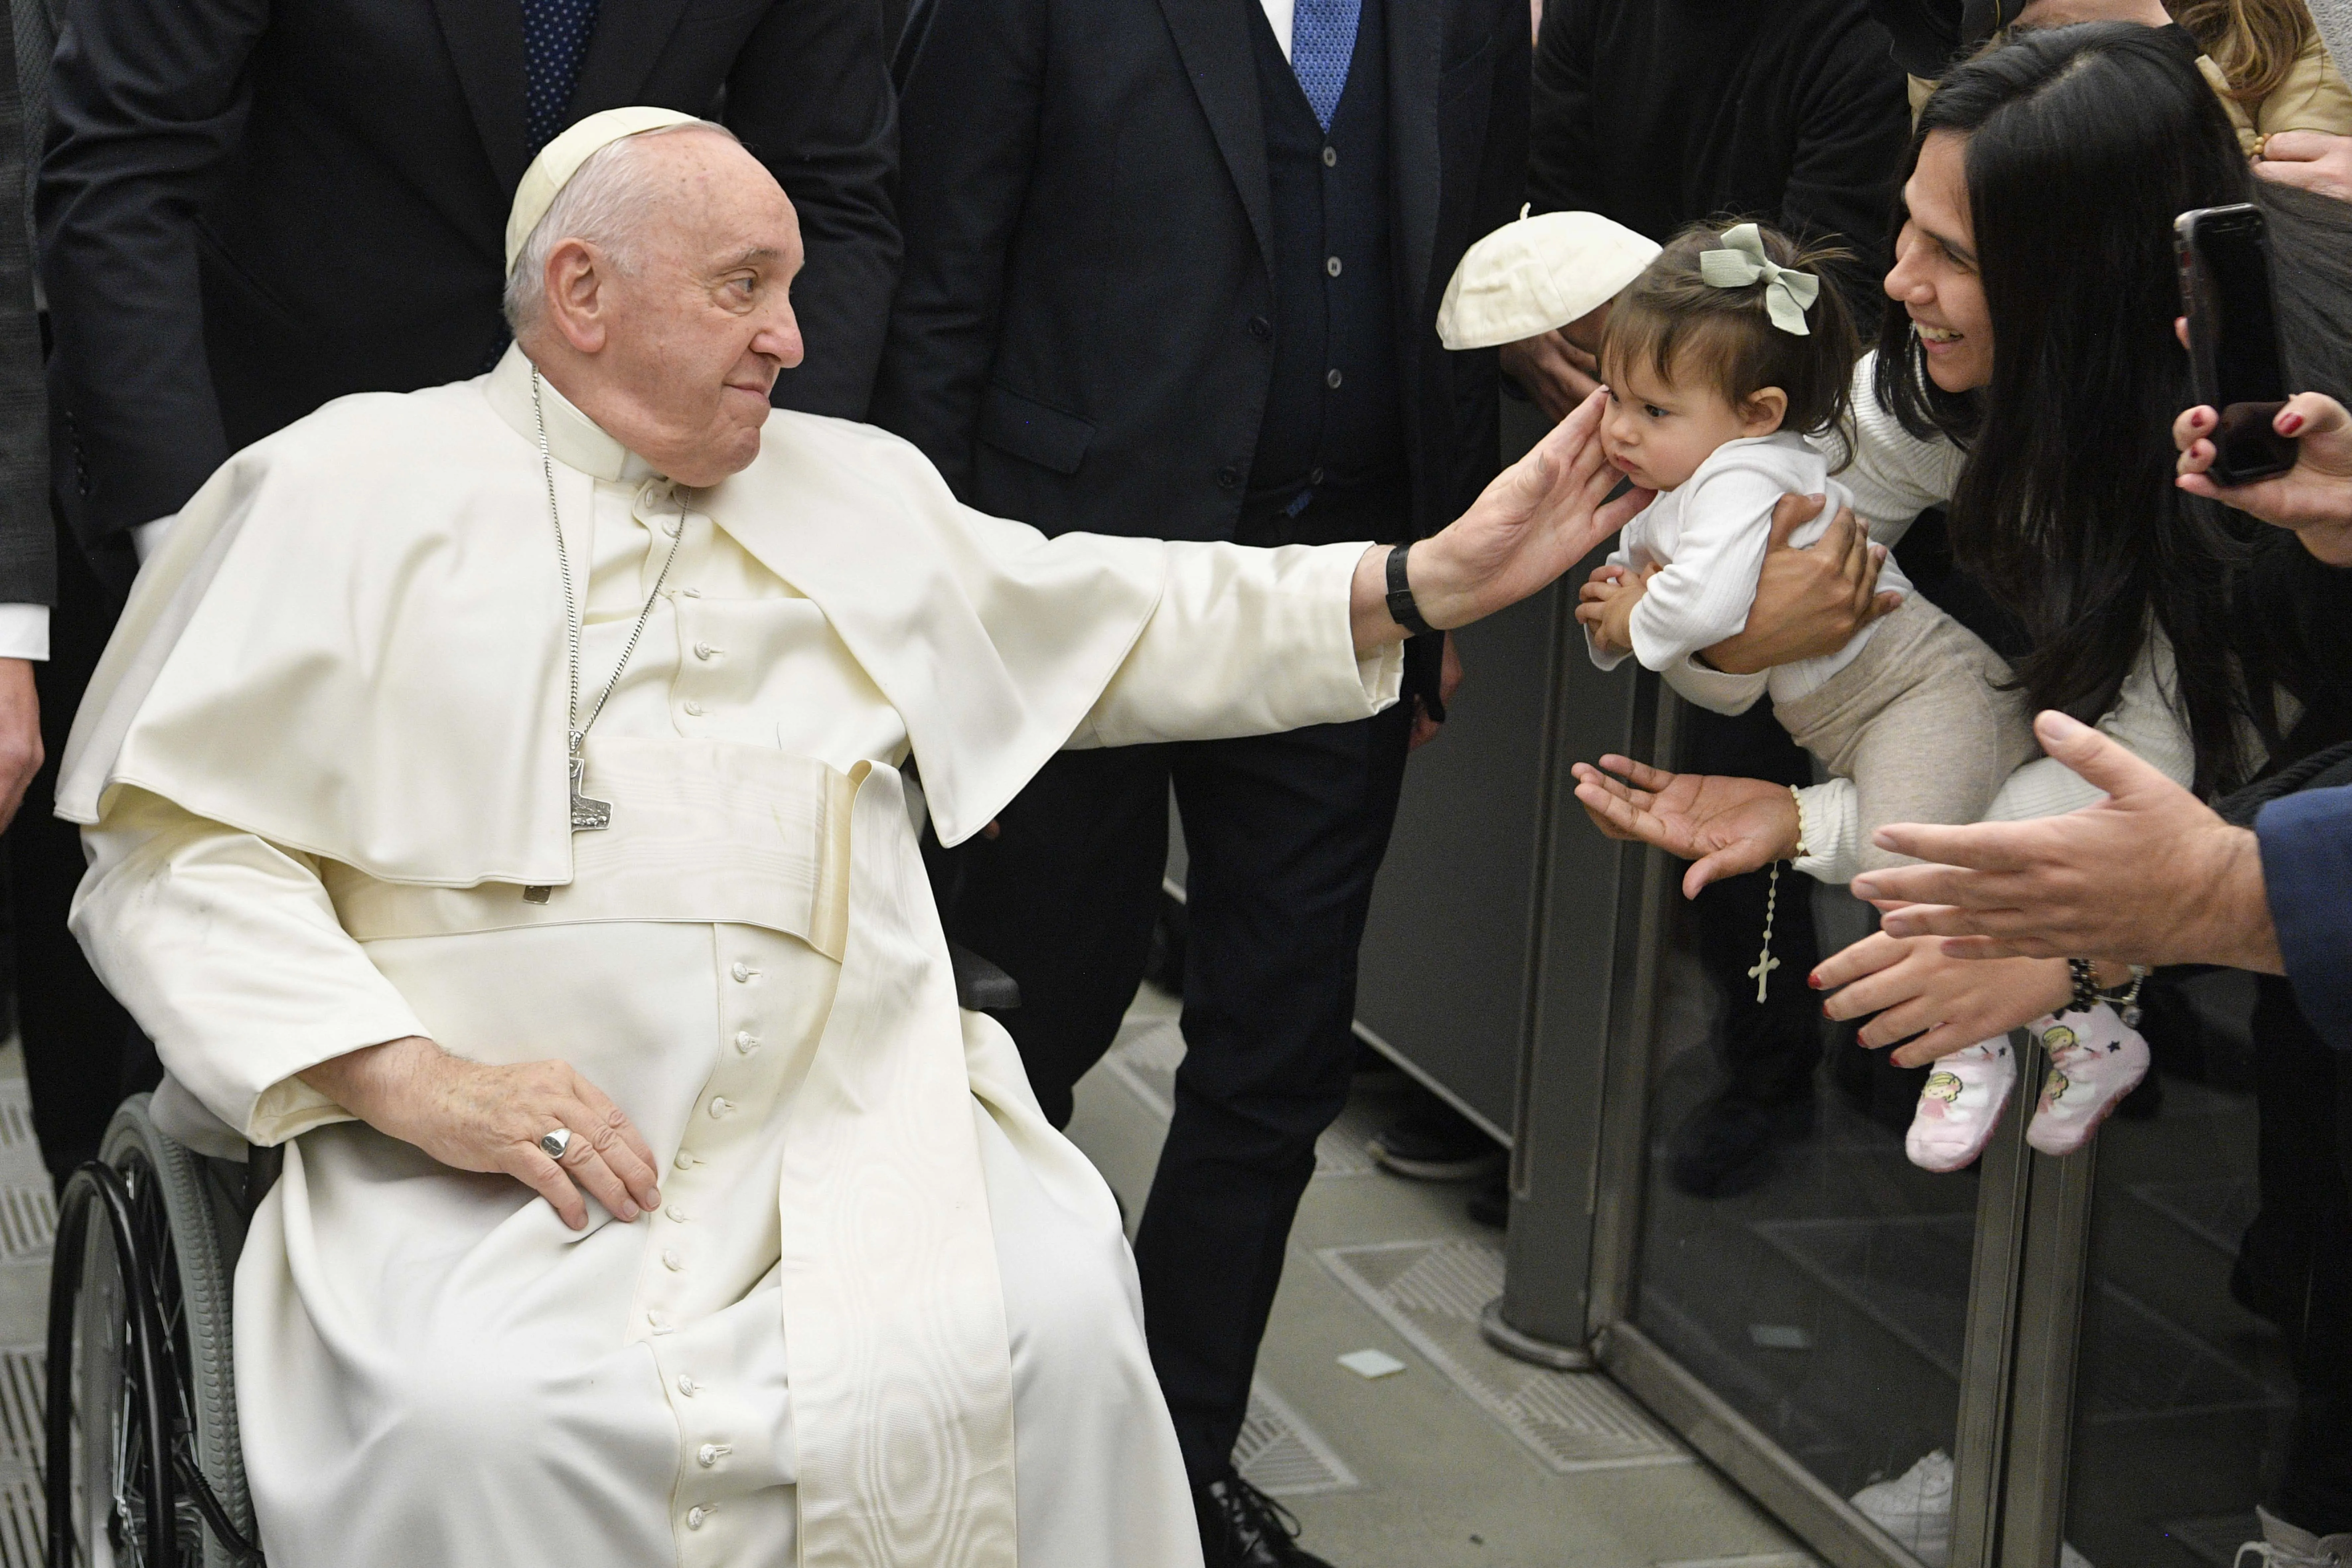 Pope Francis, seated in a wheelchair, greets a child during the pope's general audience at the Vatican on Jan. 25, 2023.?w=200&h=150